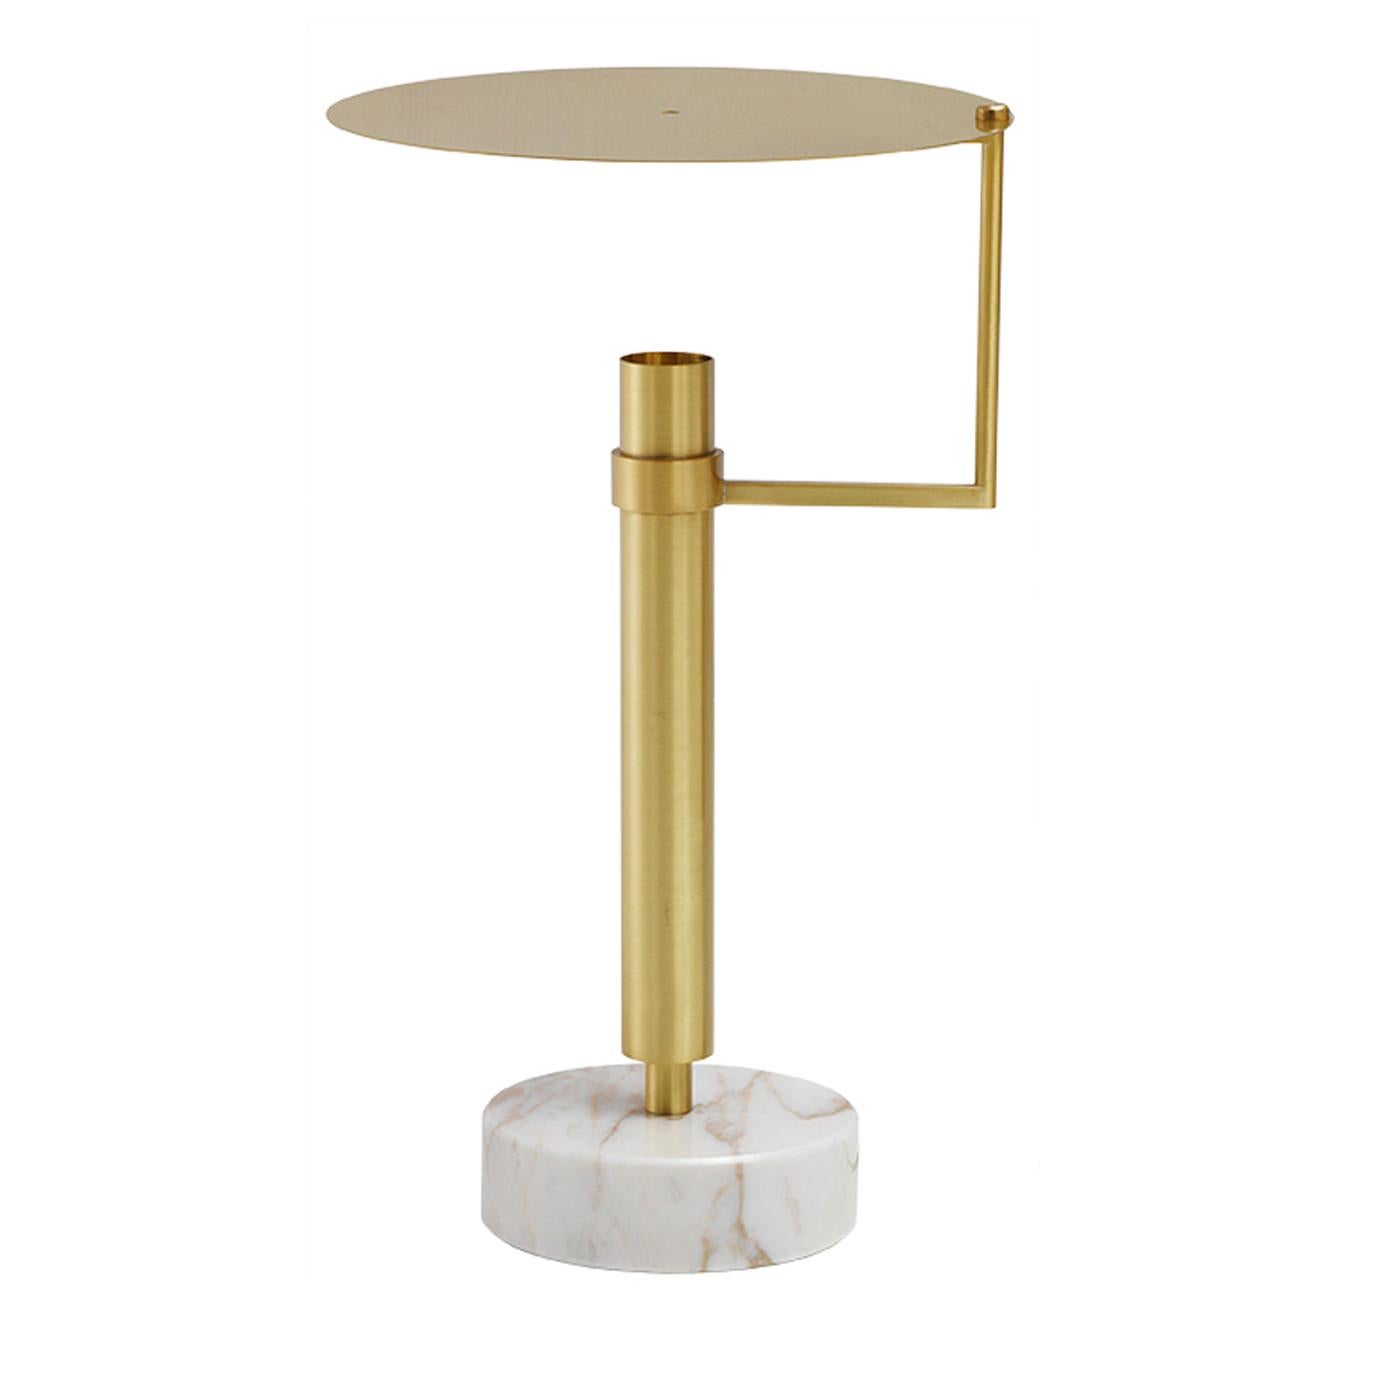 Simultaneously irreverent, chic and luxurious, the Meccano table lamp makes for a perfect accent in an entryway. On a round Emperador marble base, the lamp is crafted in brass with a satin finish and features an original disk to diffuse light in an